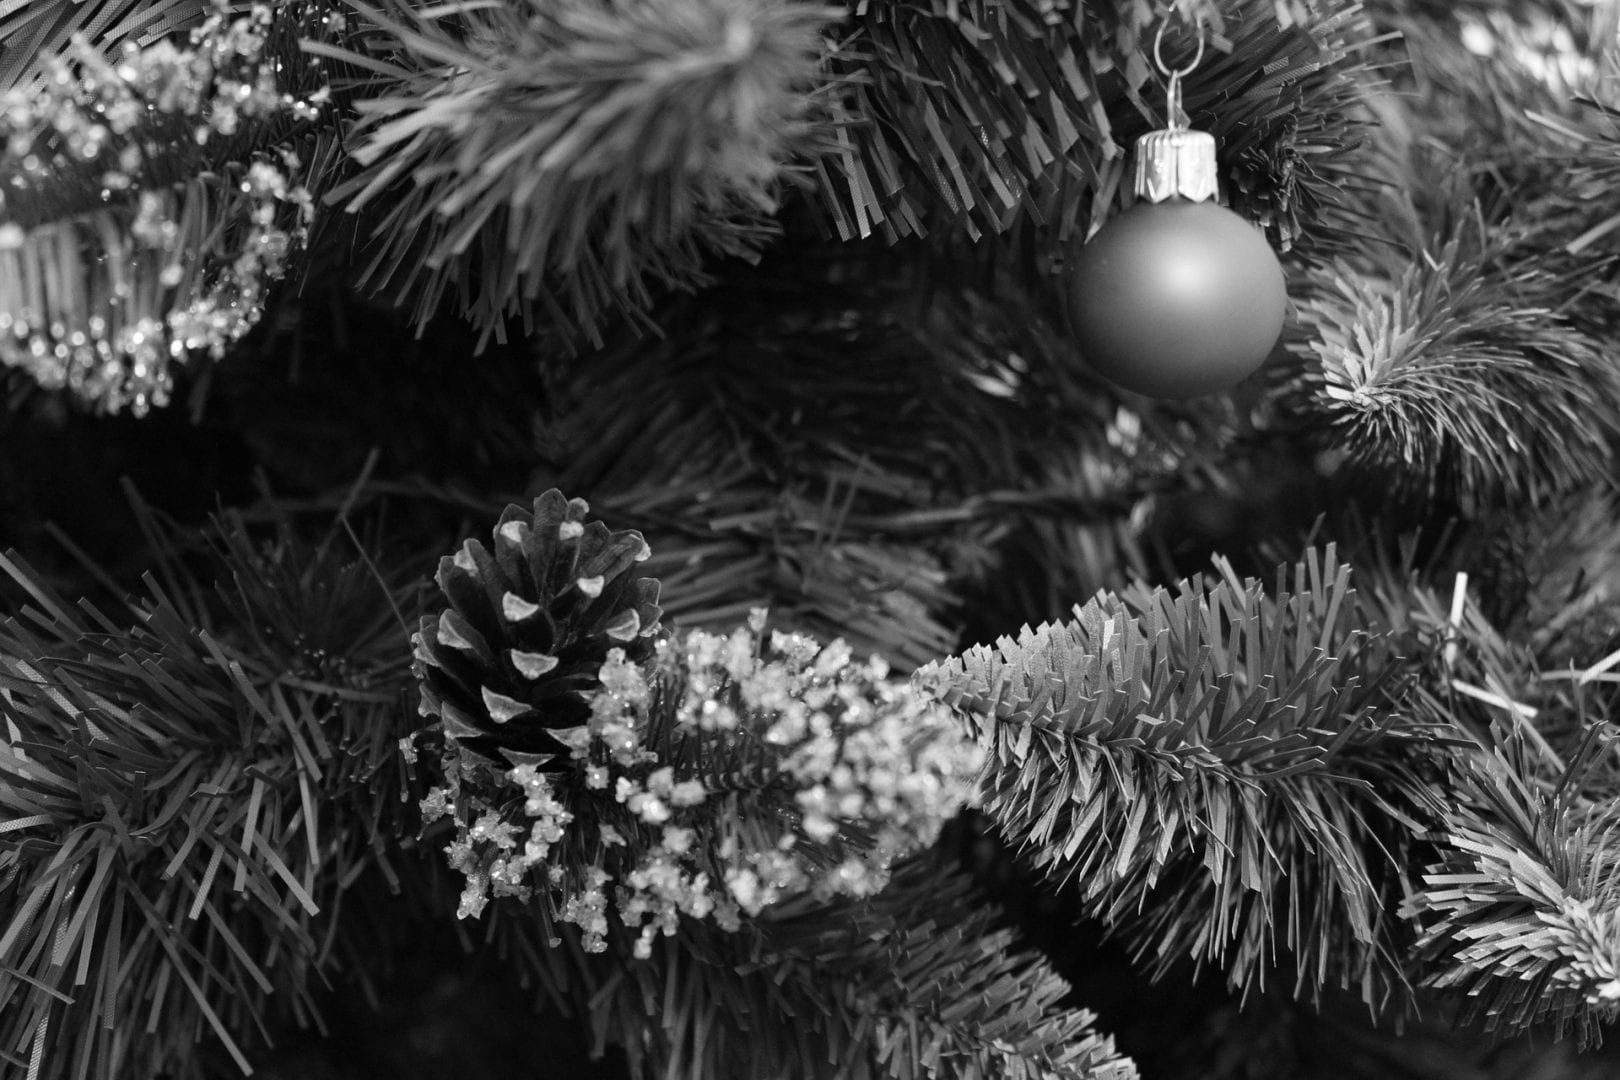 a black and white close up photo of a pine tree and a round ornament